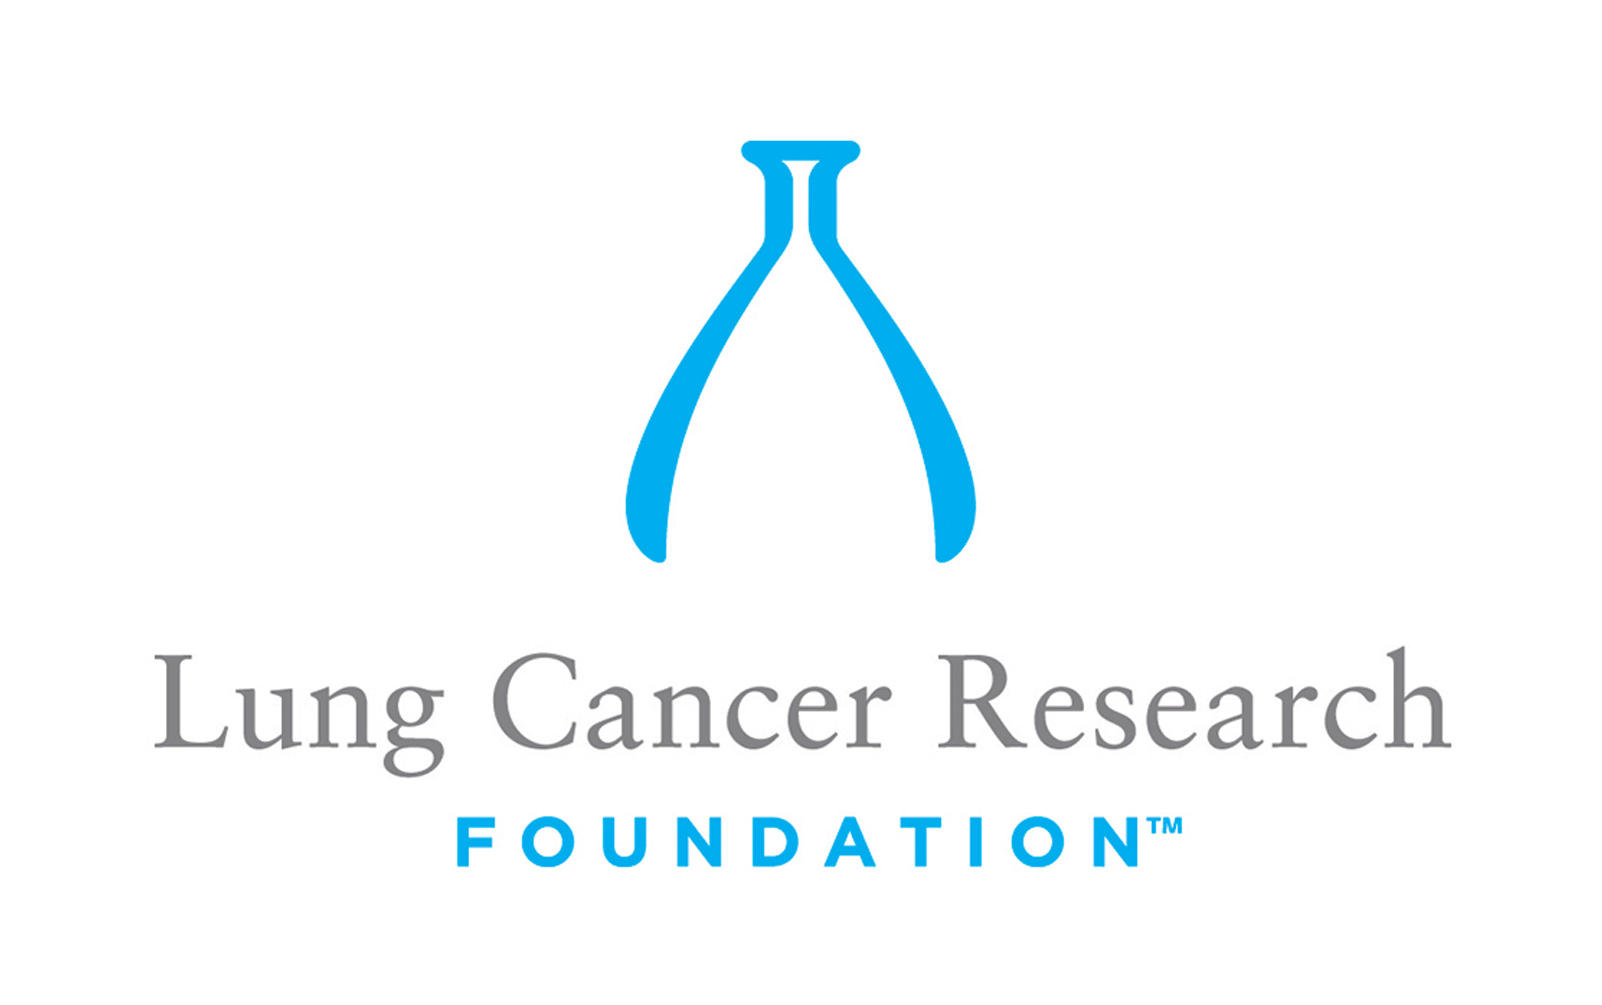 Lung Cancer Foundation Launches New Research Initiative to Save Lives